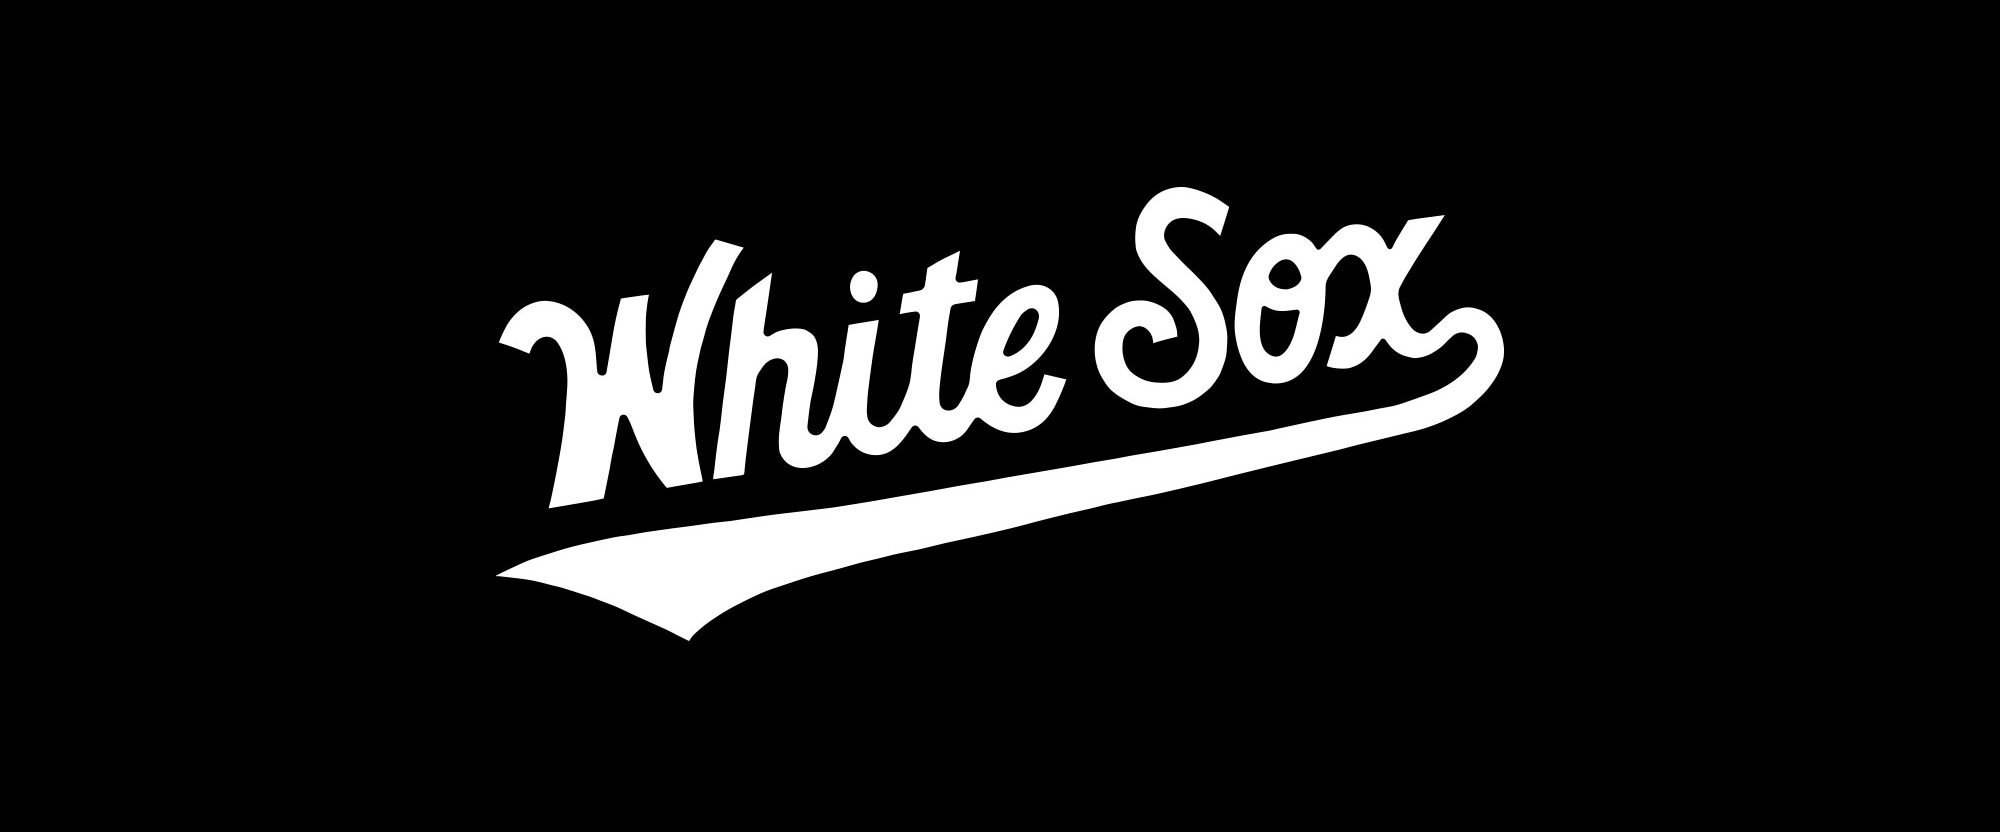 Brand New New Alternate Logo for Chicago White Sox by CONTINO